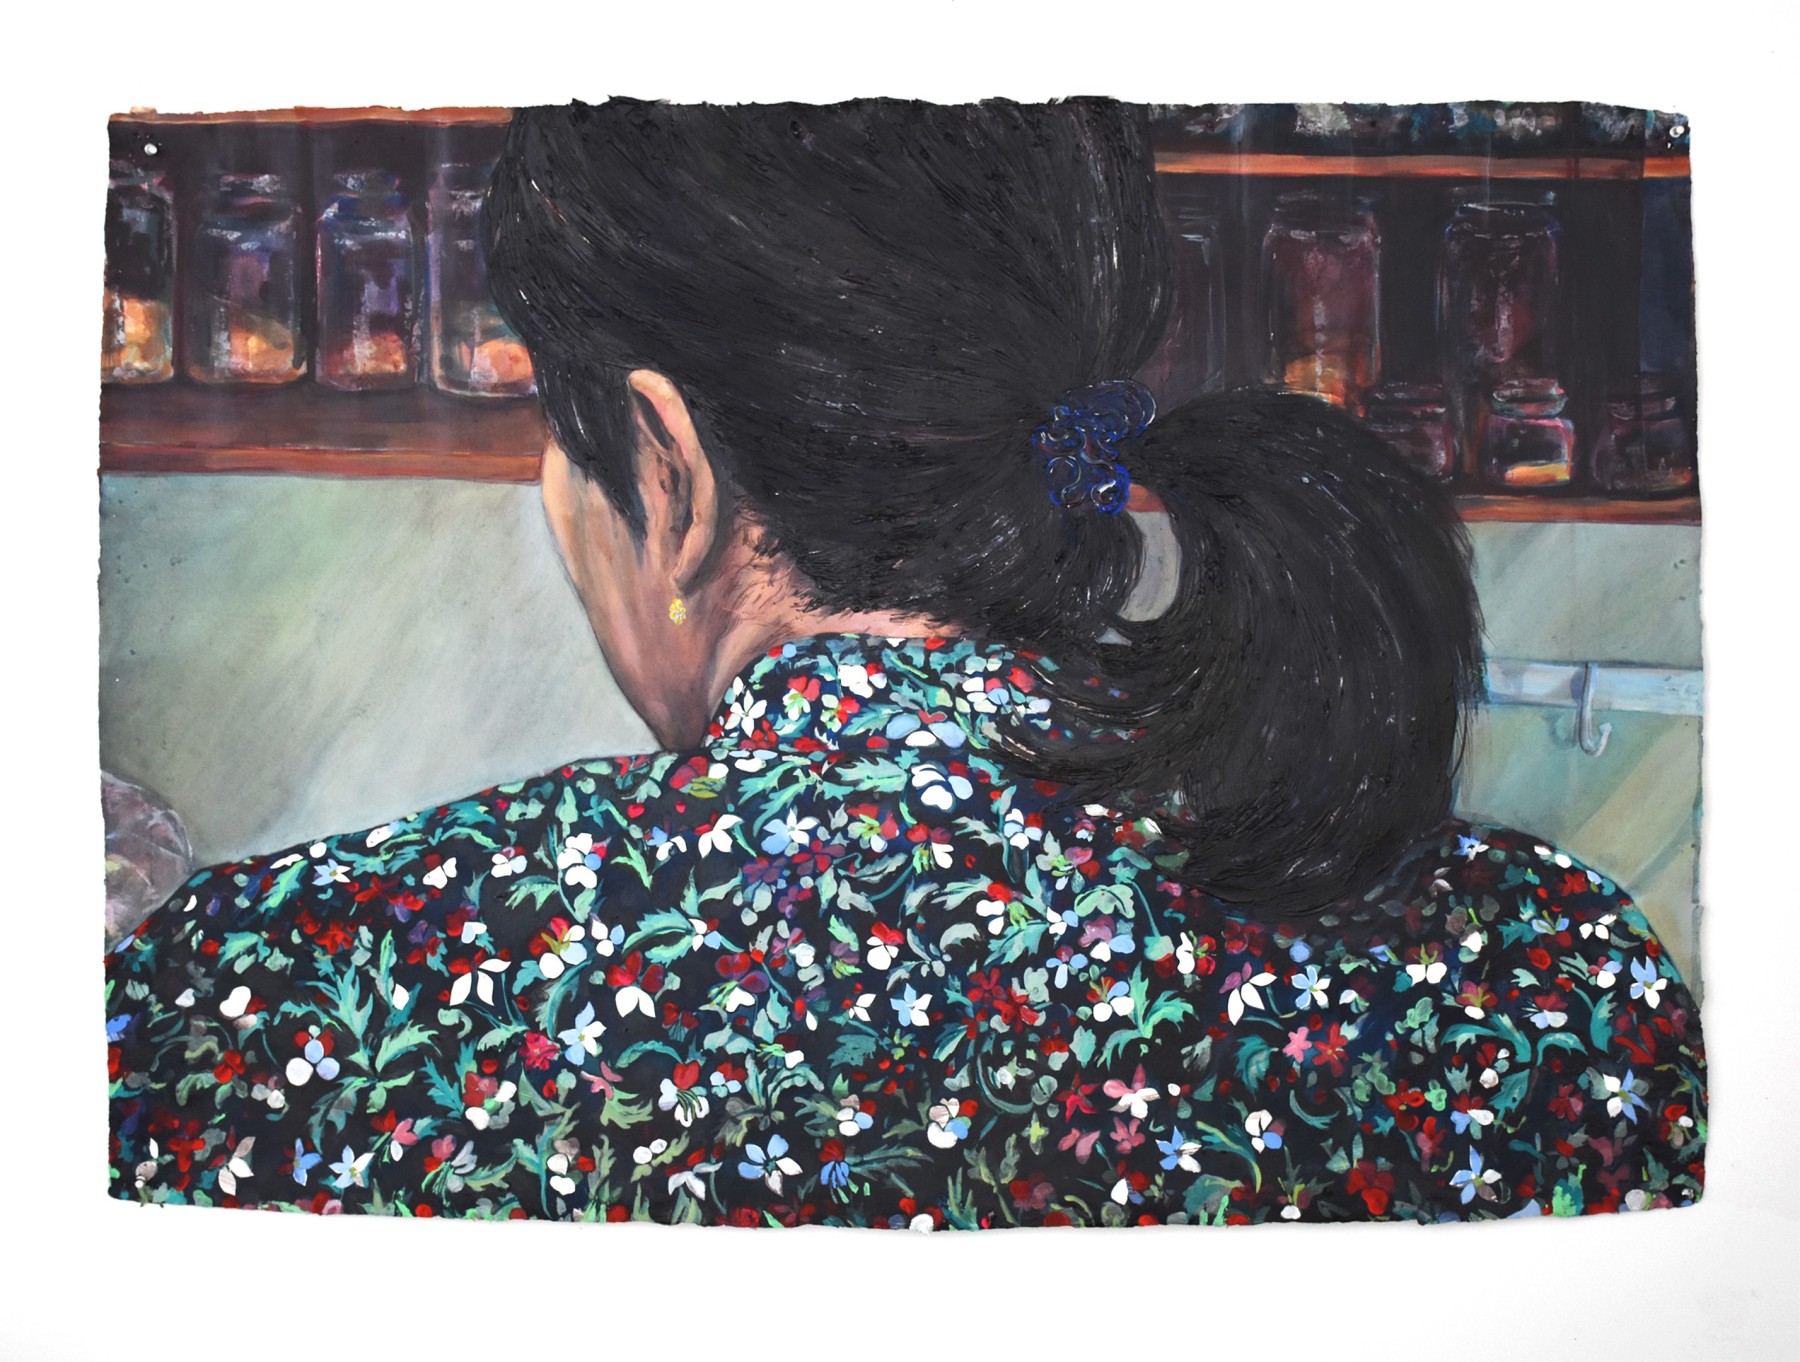 Nape (Ambereen at home), acrylic on handmade Indian Khadi paper, dimensions approx. 43 x 53 inches (will double check later today), 2019